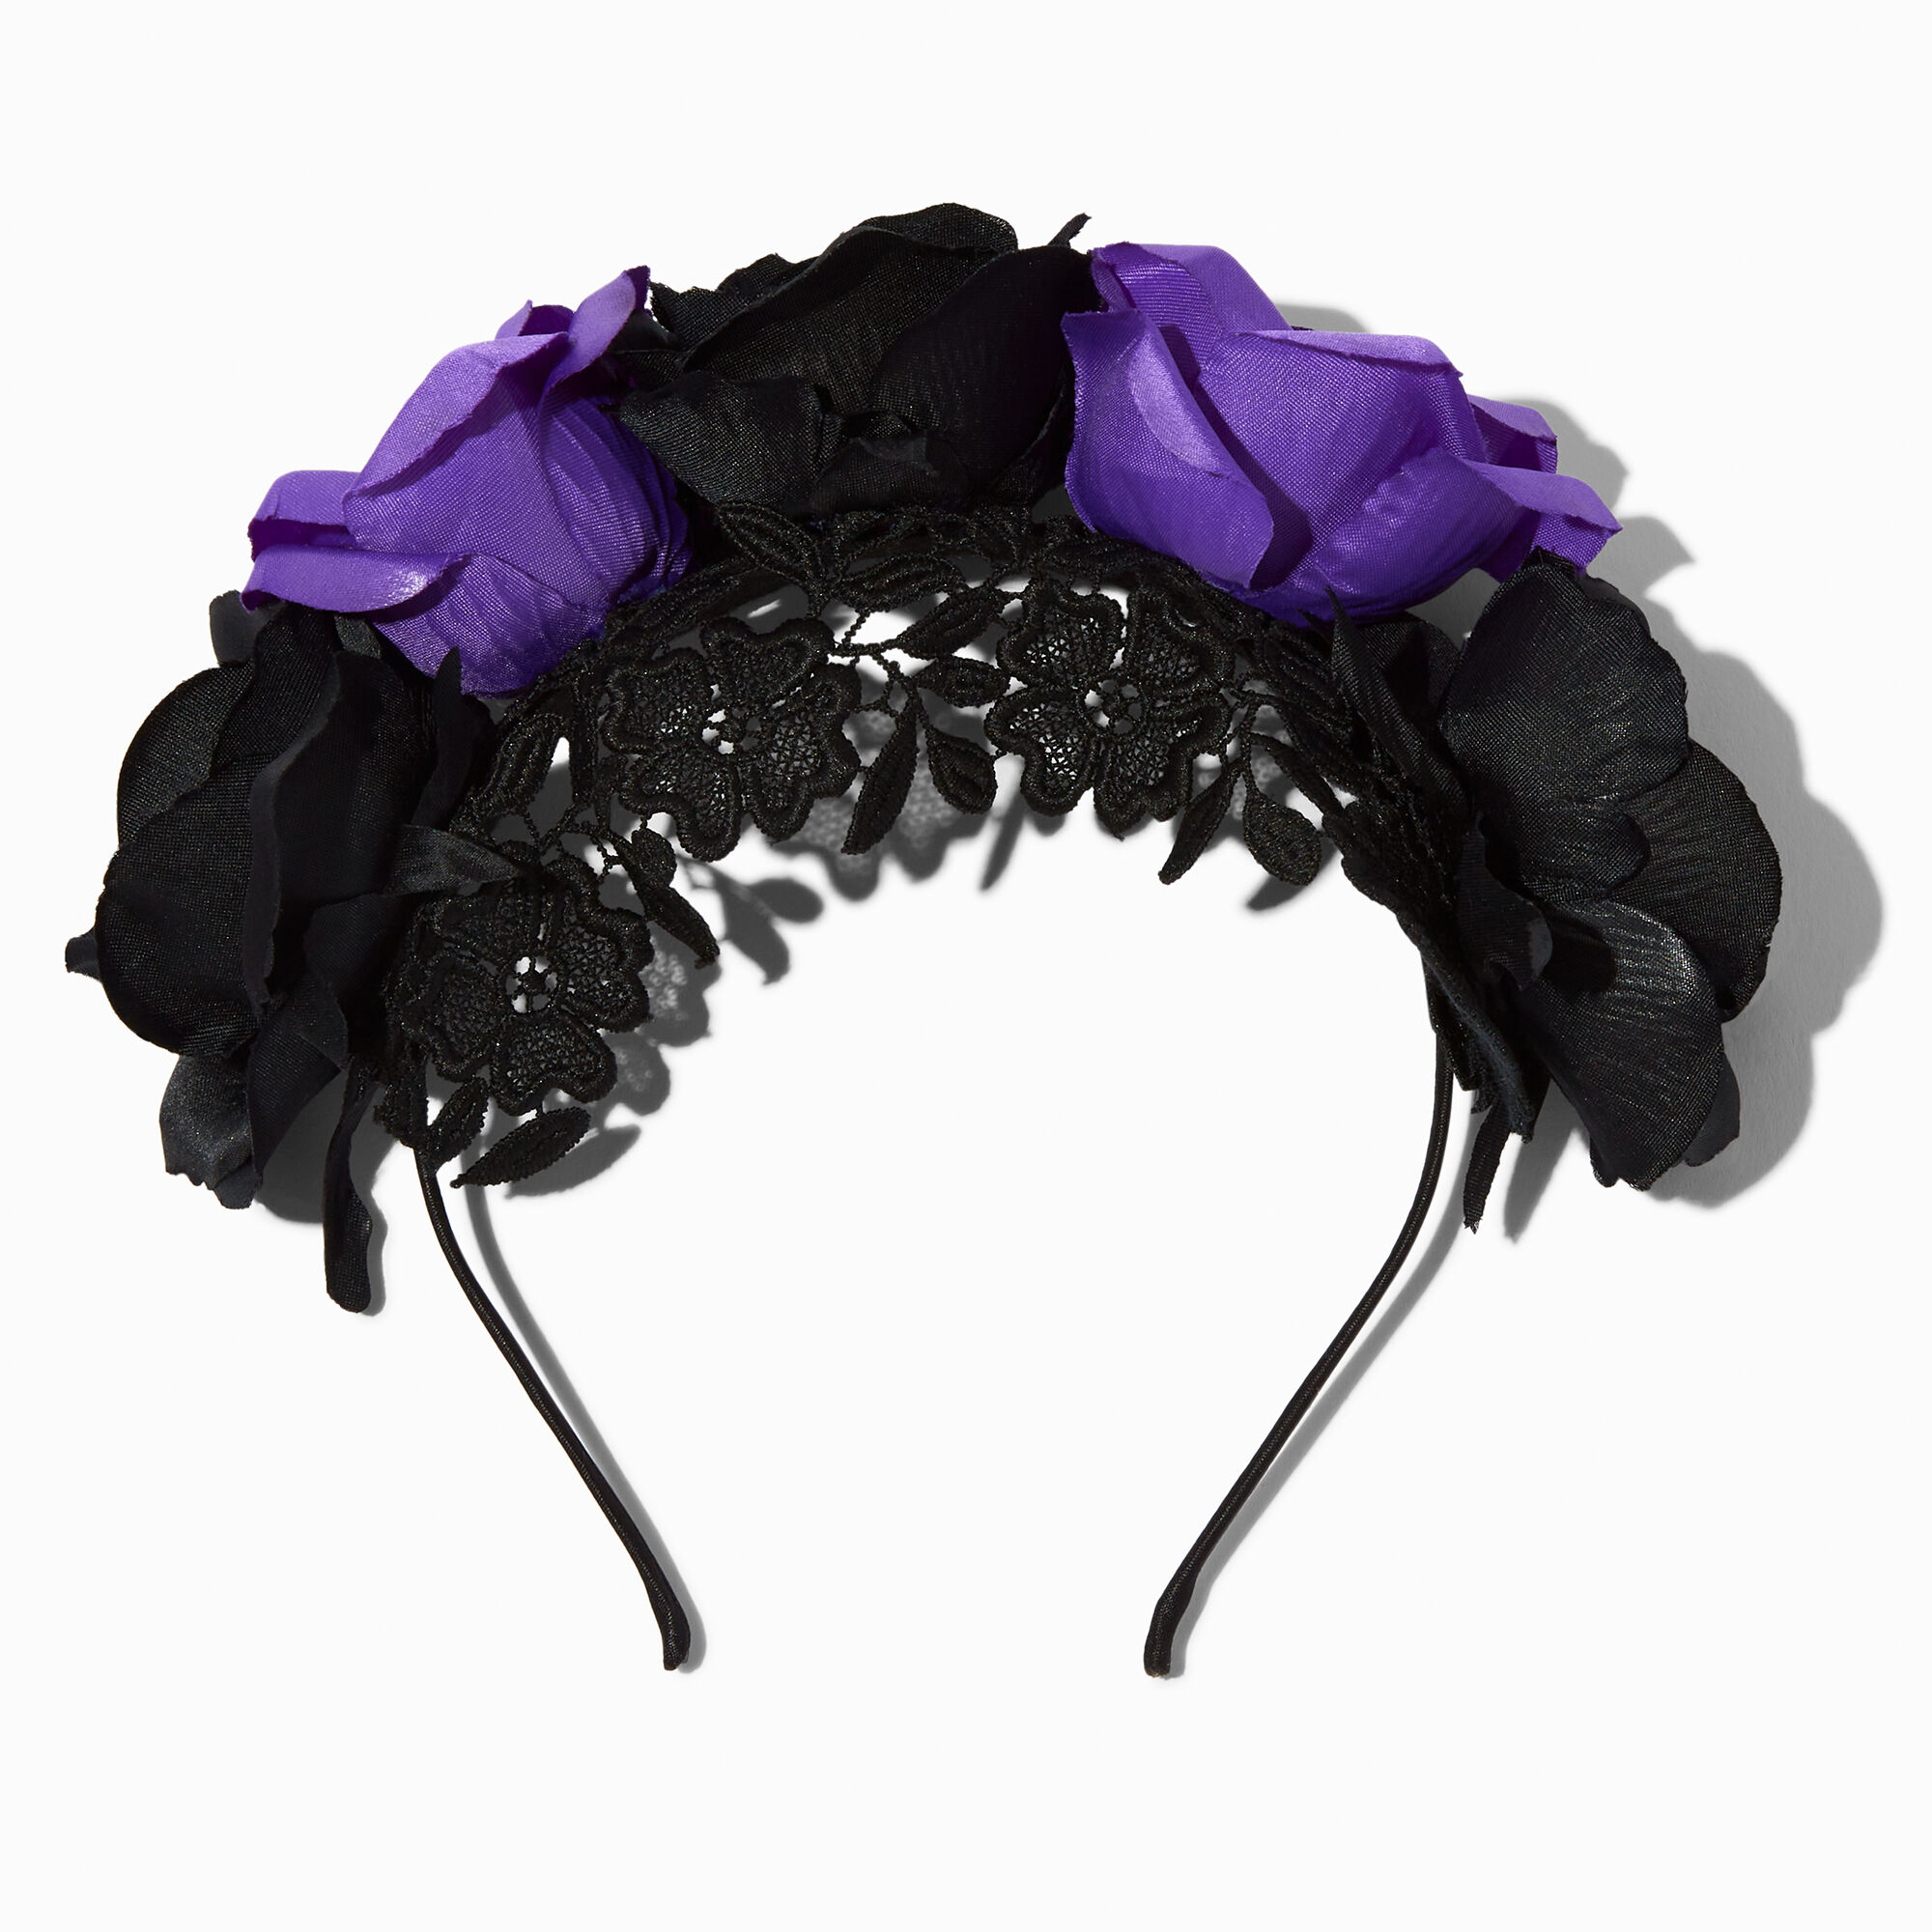 View Claires Purple Roses Headband Black information